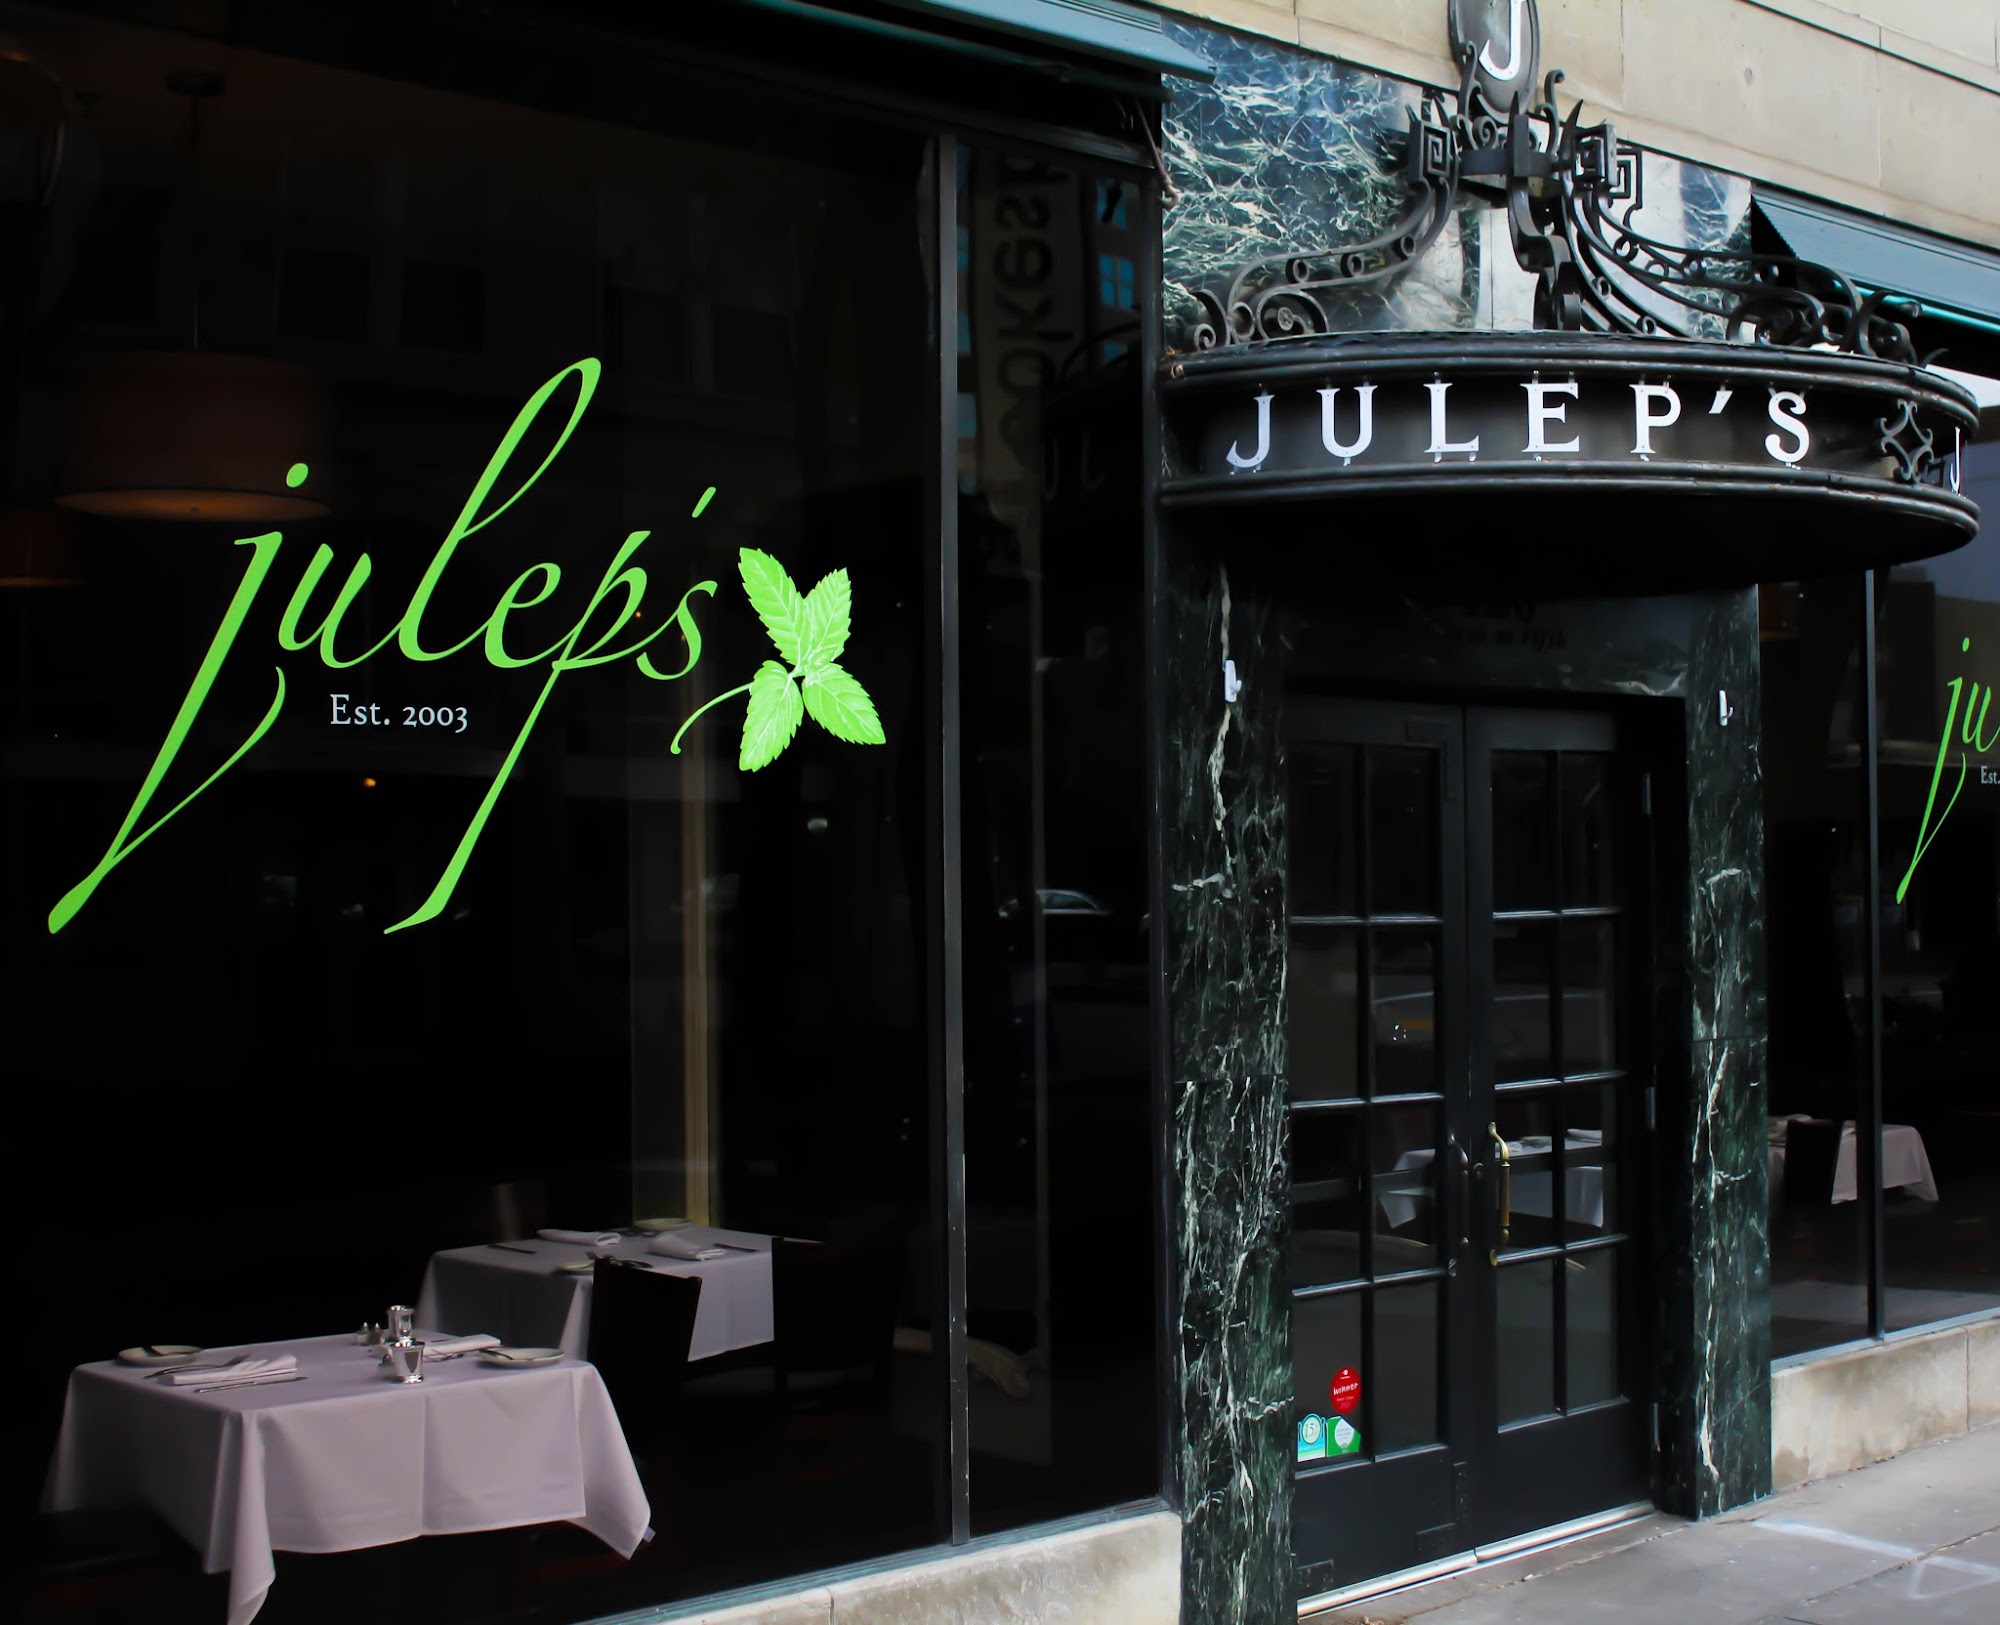 Julep's New Southern Cuisine